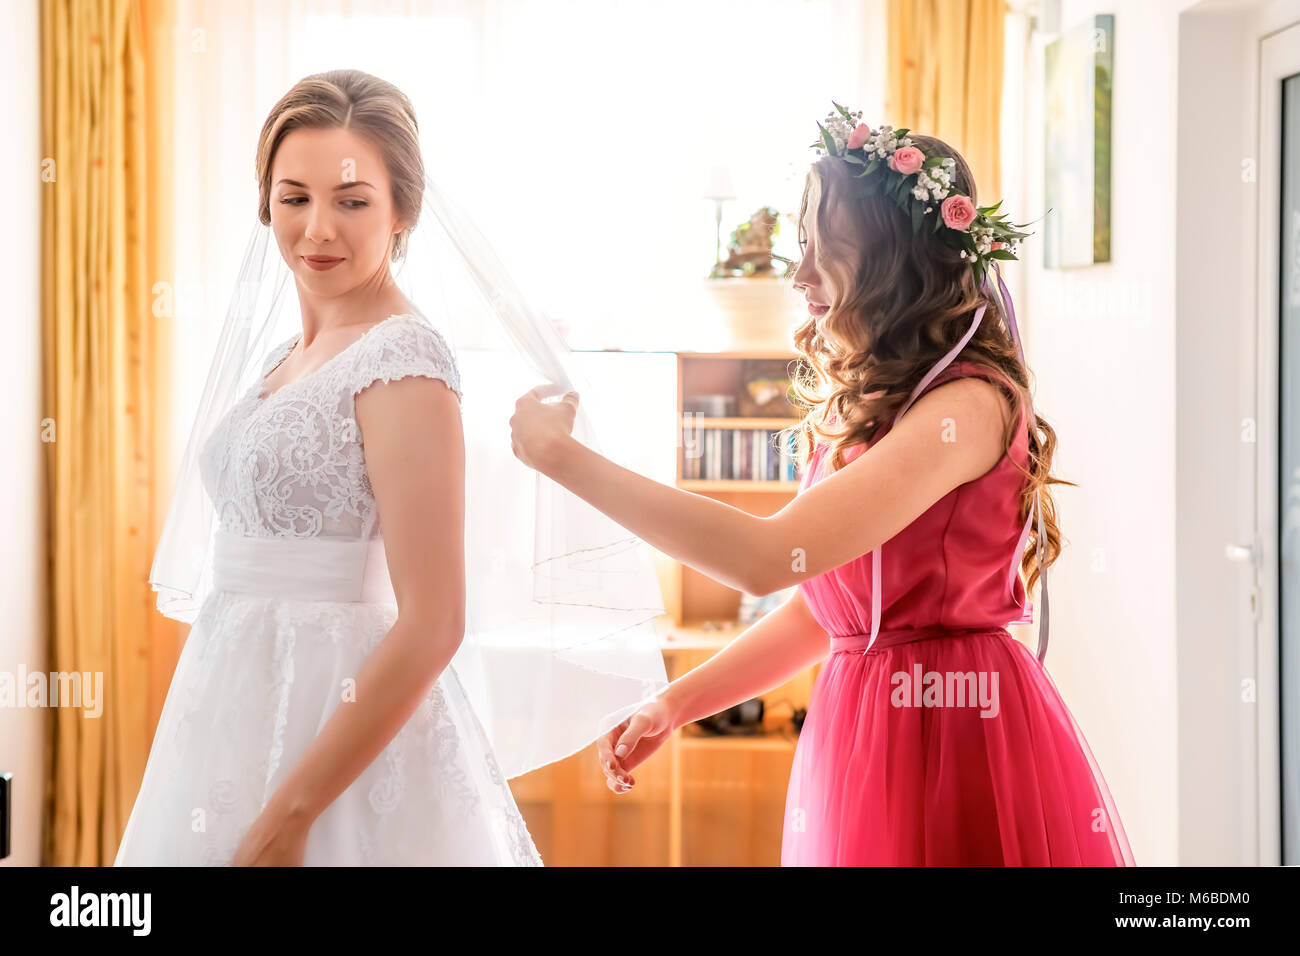 helping the bride to put her wedding dress on Stock Photo